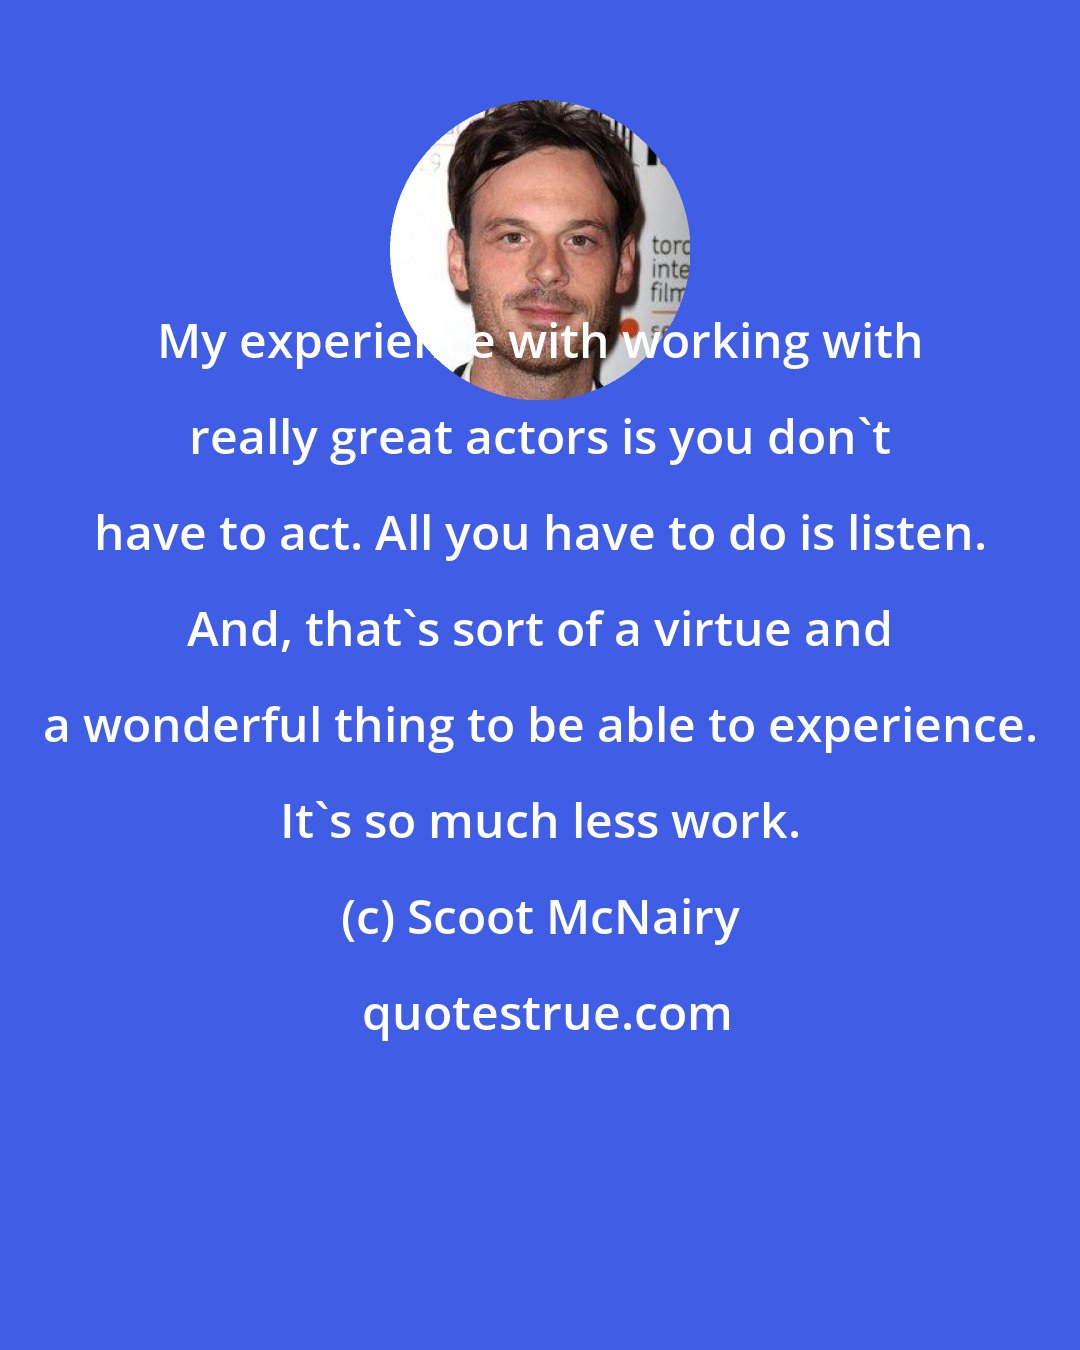 Scoot McNairy: My experience with working with really great actors is you don't have to act. All you have to do is listen. And, that's sort of a virtue and a wonderful thing to be able to experience. It's so much less work.